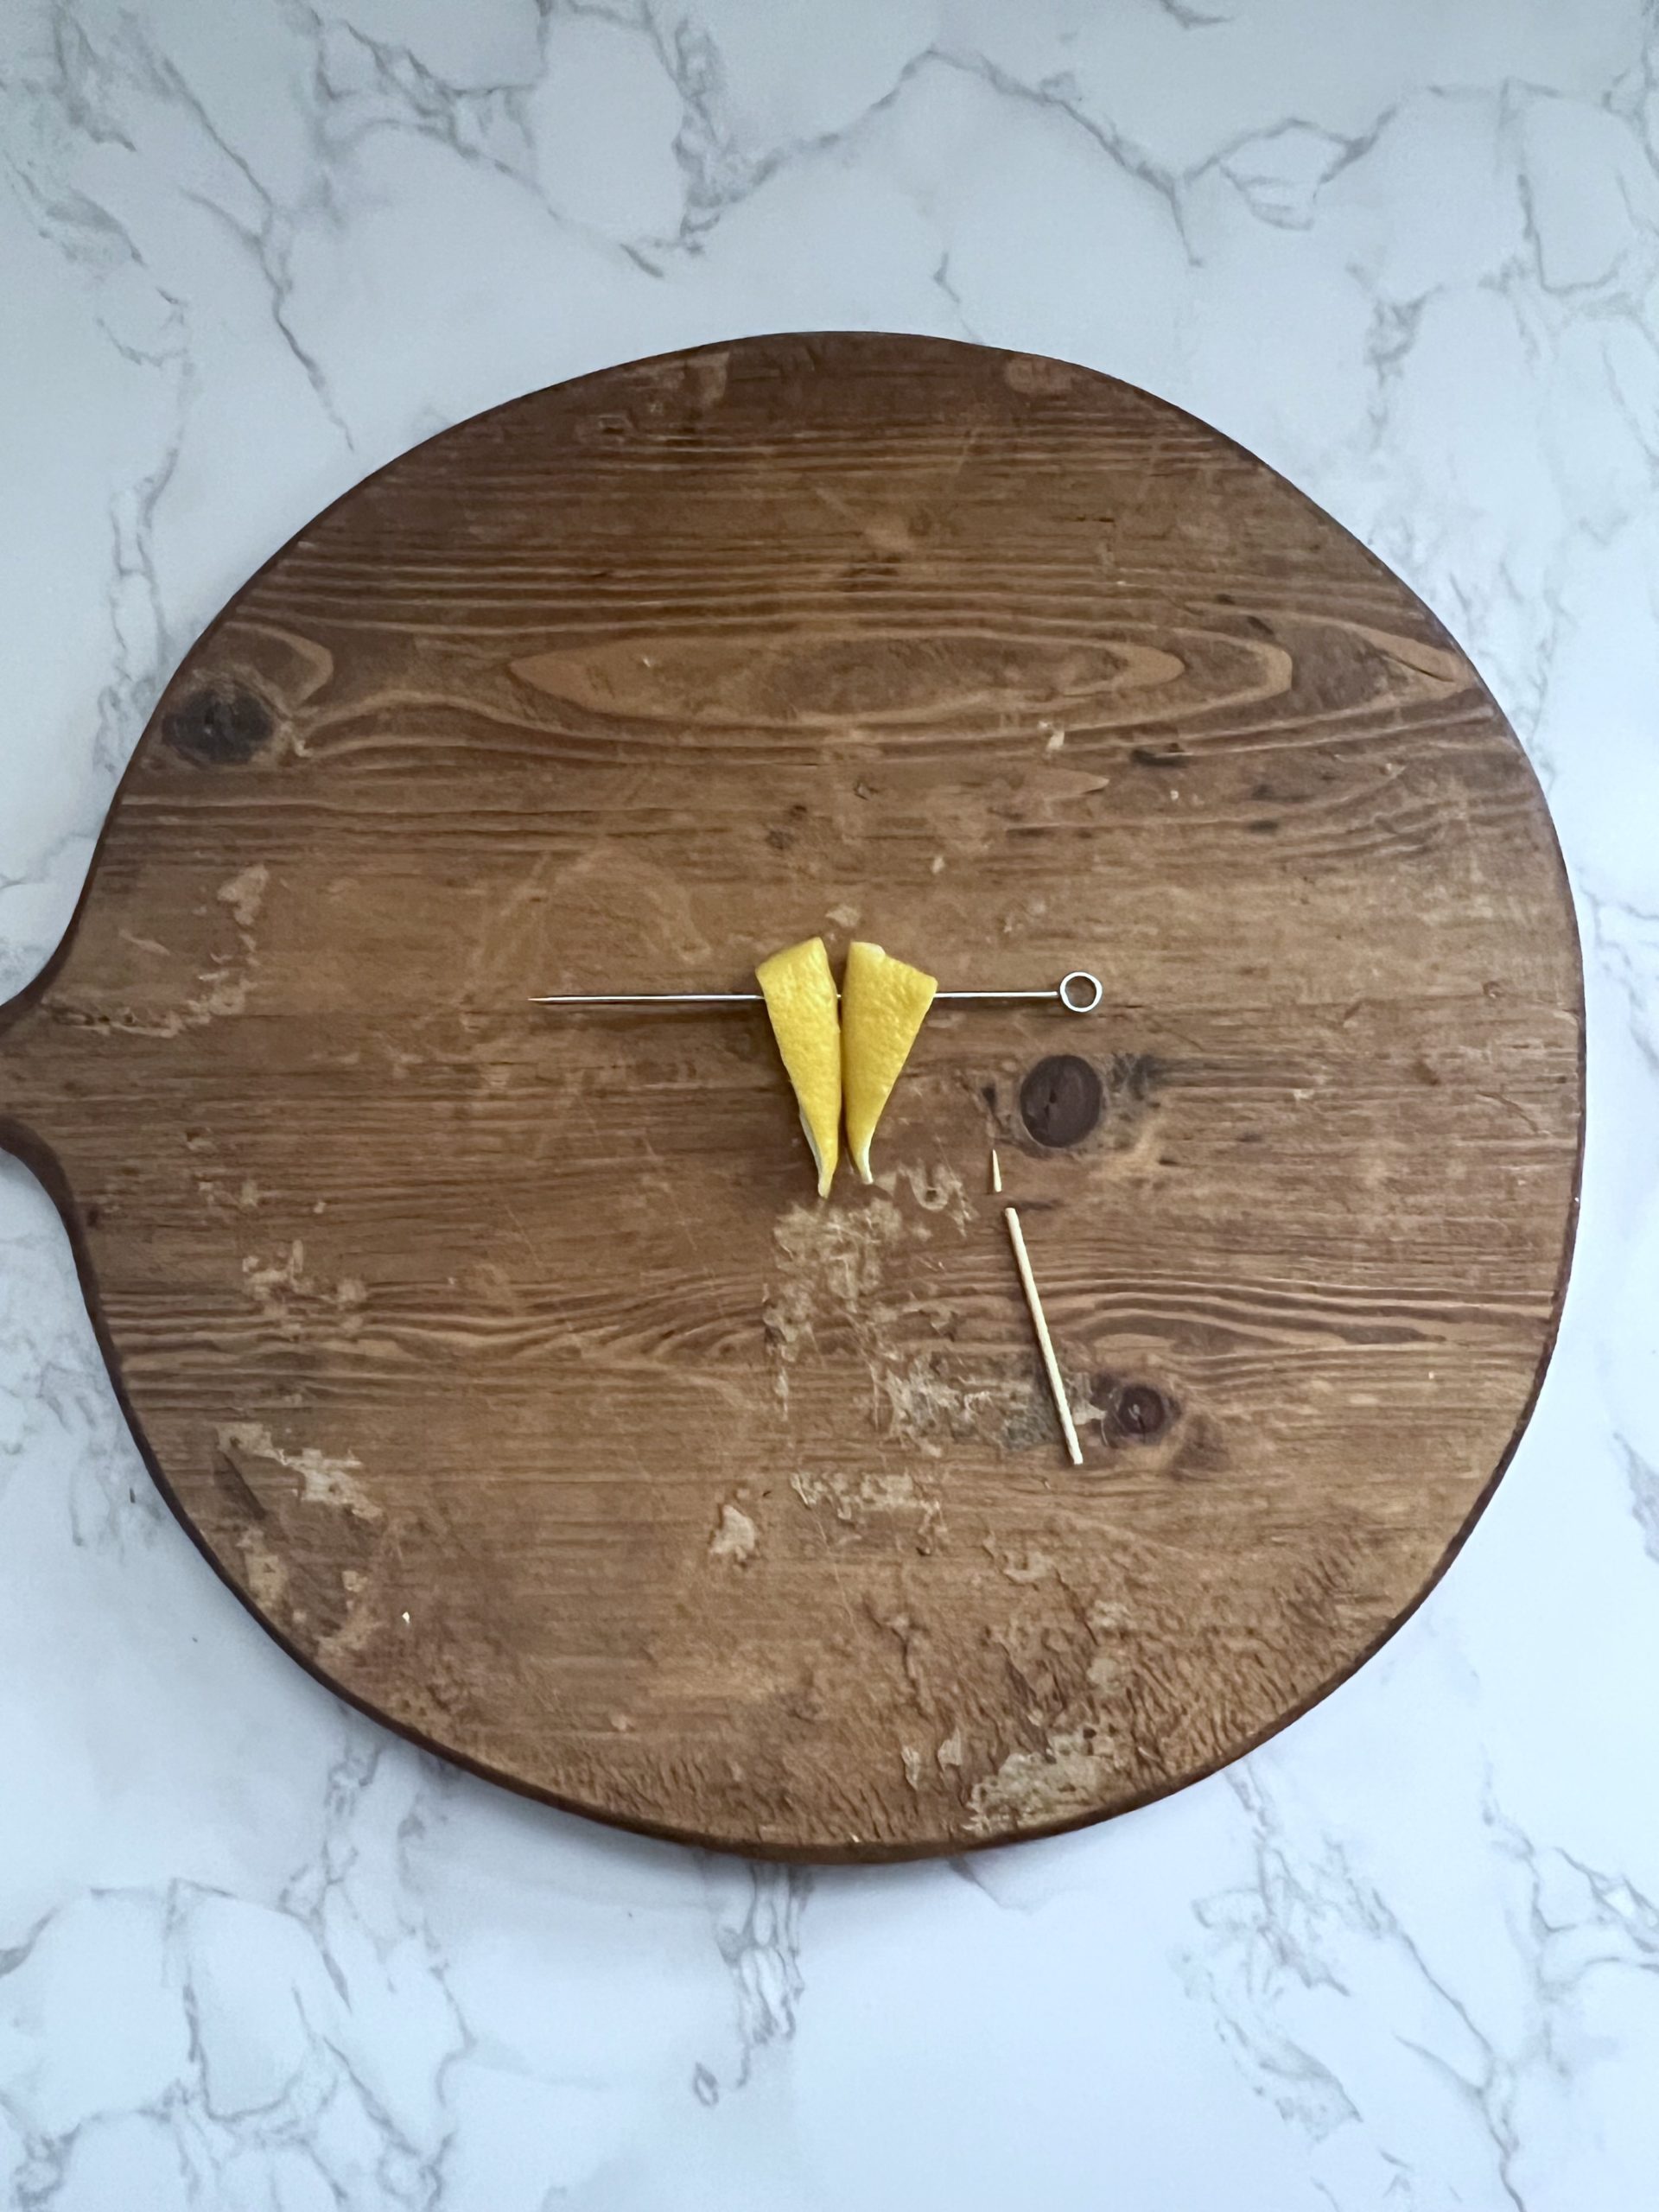 Two pieces of lemon peel joined together with a cocktail pick to resemble the plane wings of the paper plane garnish and a toothpick with the tip broken off on a cutting board.